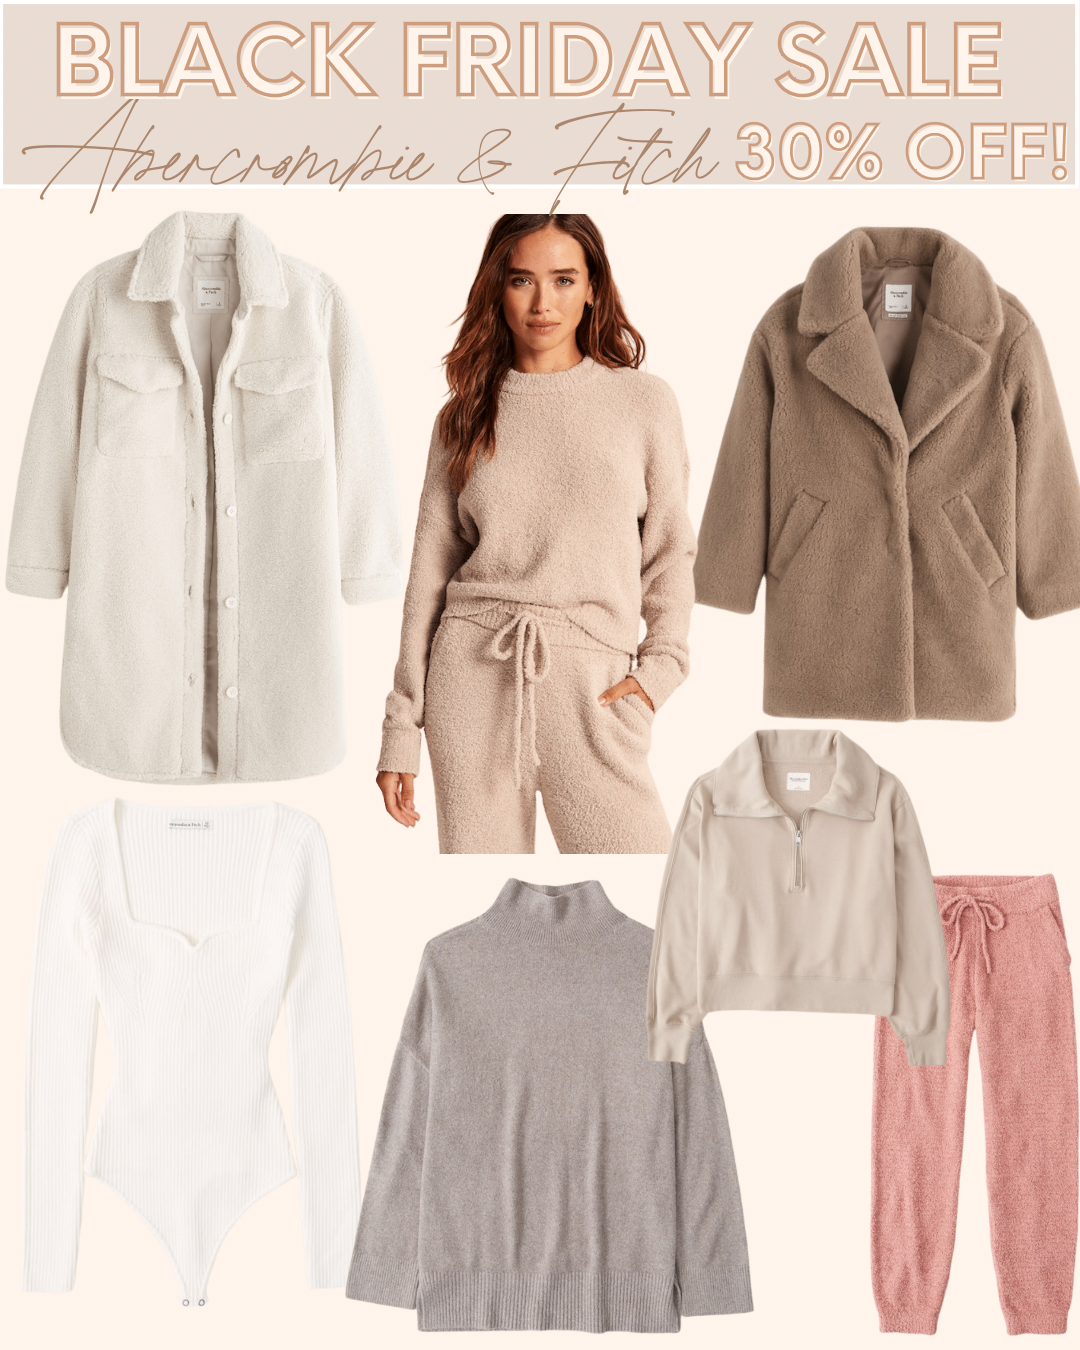 Abercrombie & Fitch Black Friday Sale - Affordable by Amanda 